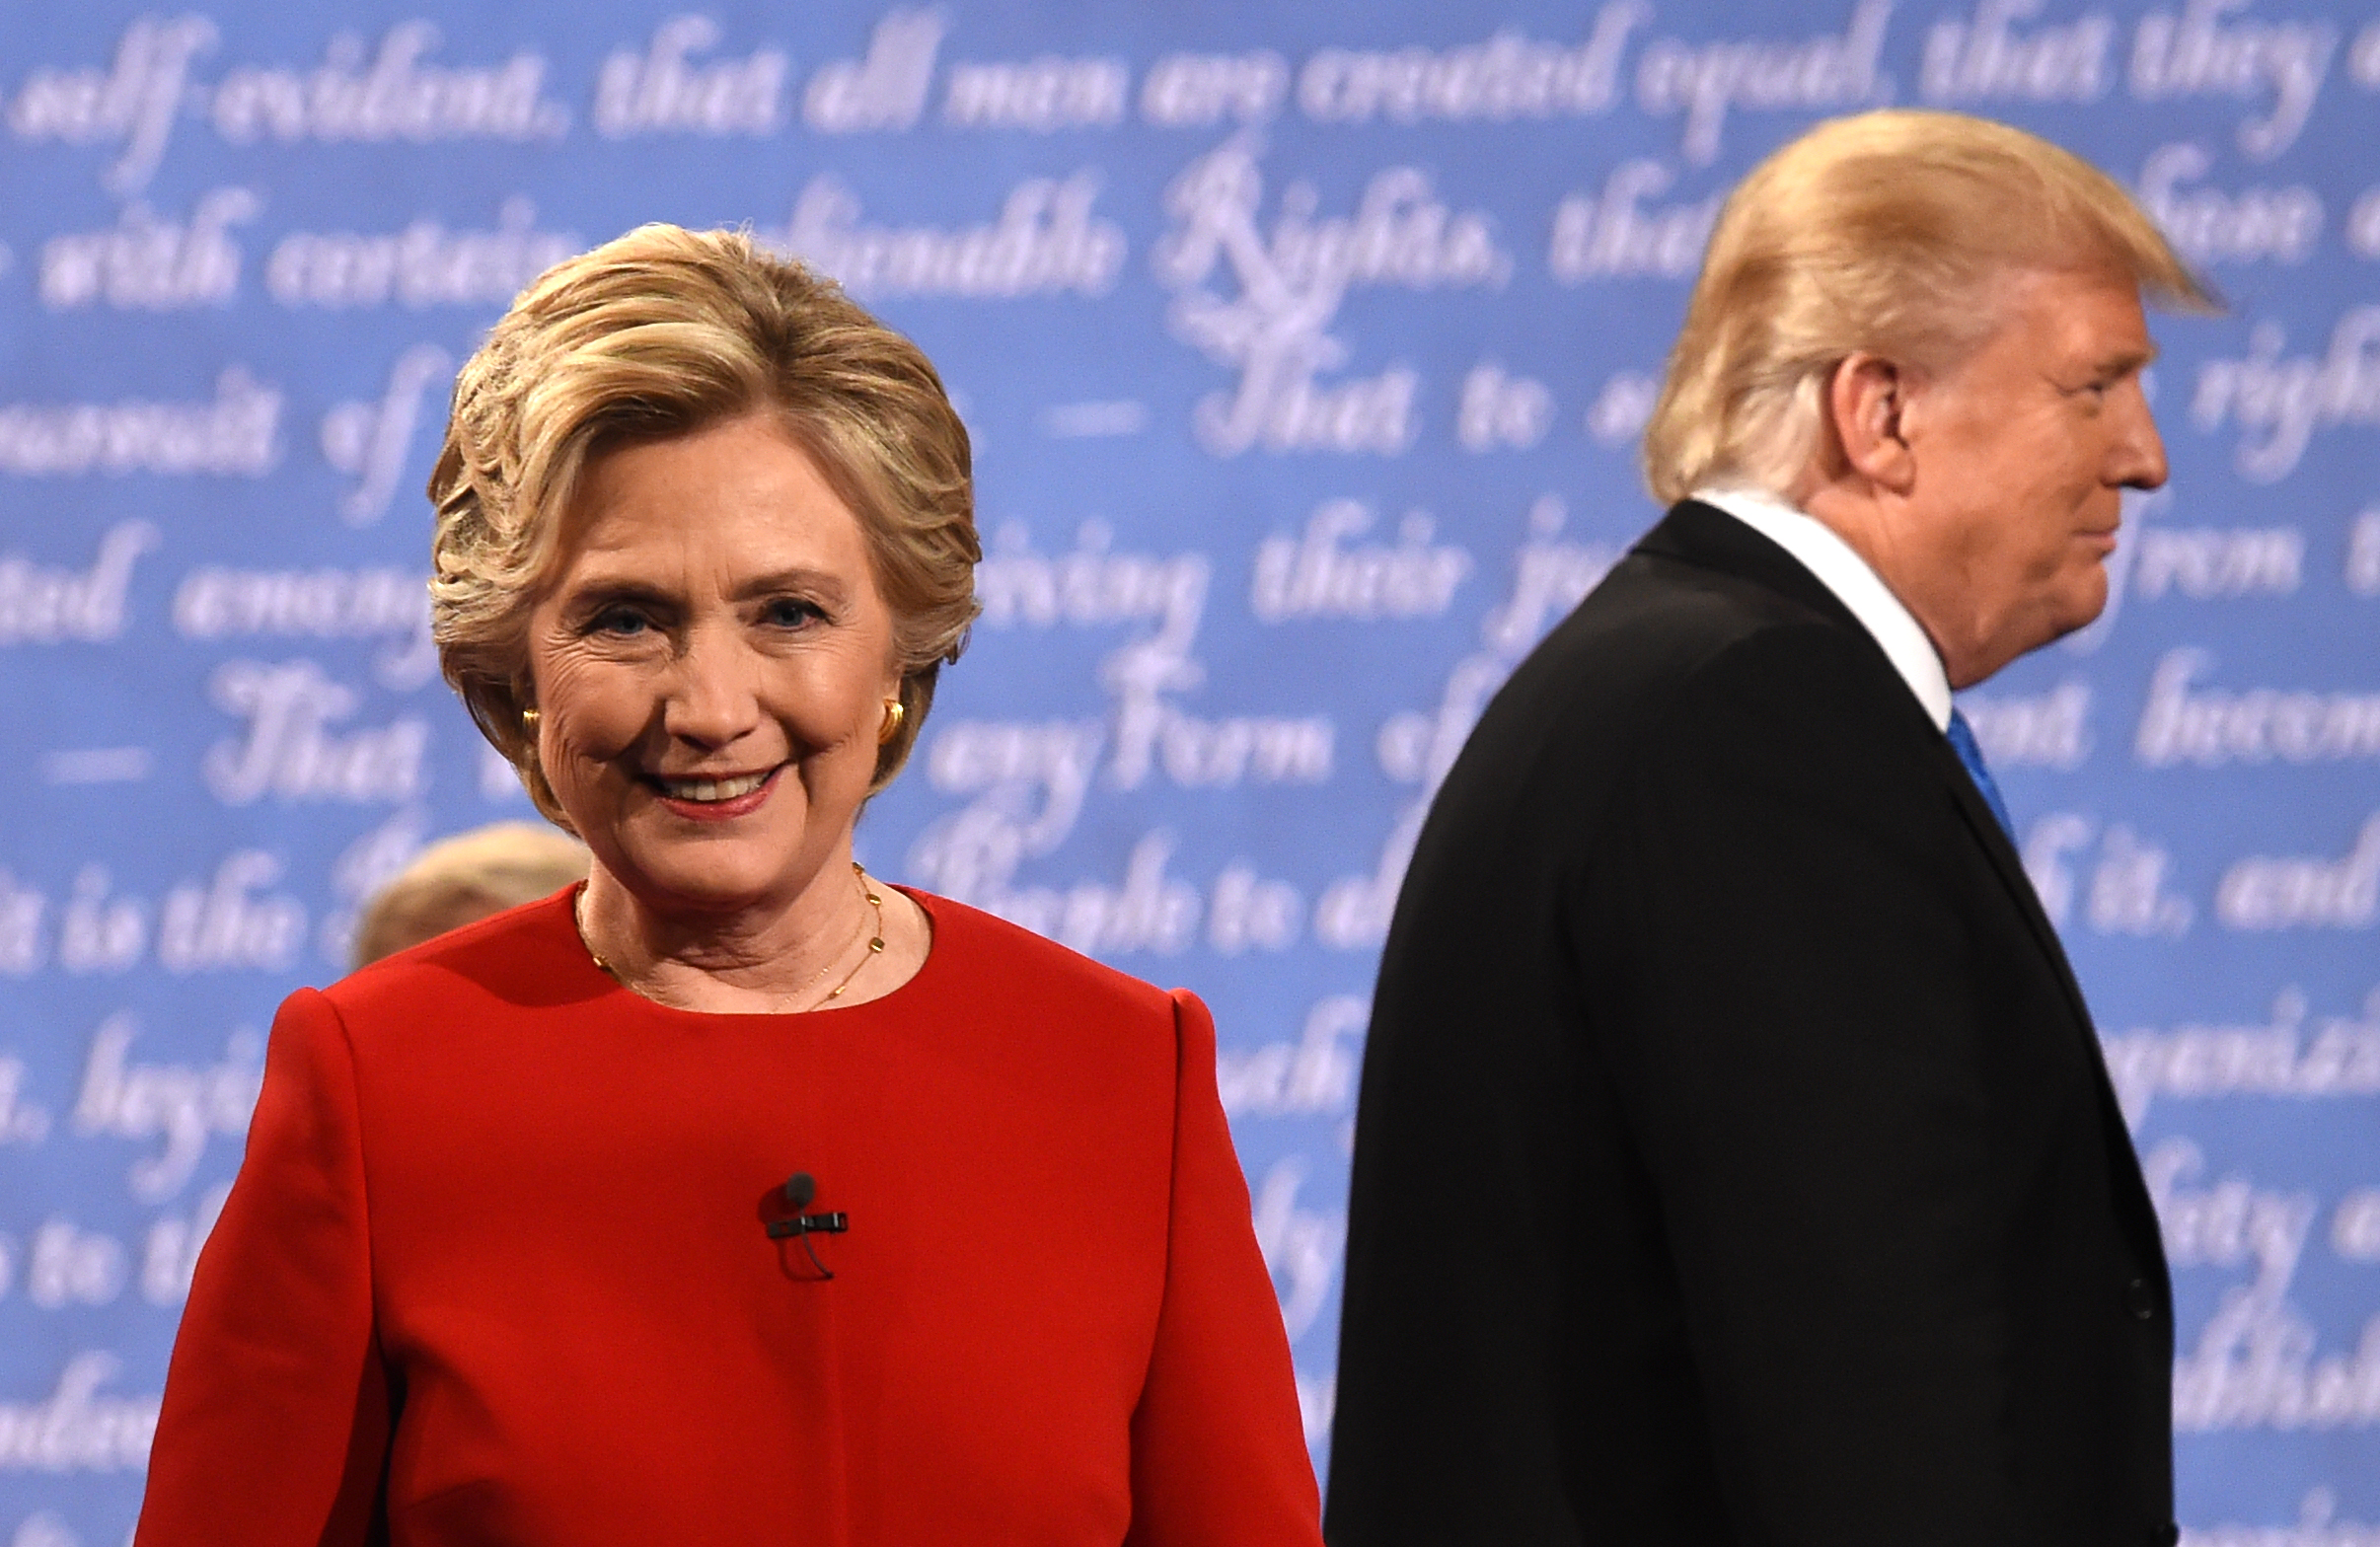 Democratic nominee Hillary Clinton (L) and Republican nominee Donald Trump leave the stage after the first presidential debate at Hofstra University in Hempstead, New York on September 26, 2016. / AFP PHOTO / Timothy A. CLARY